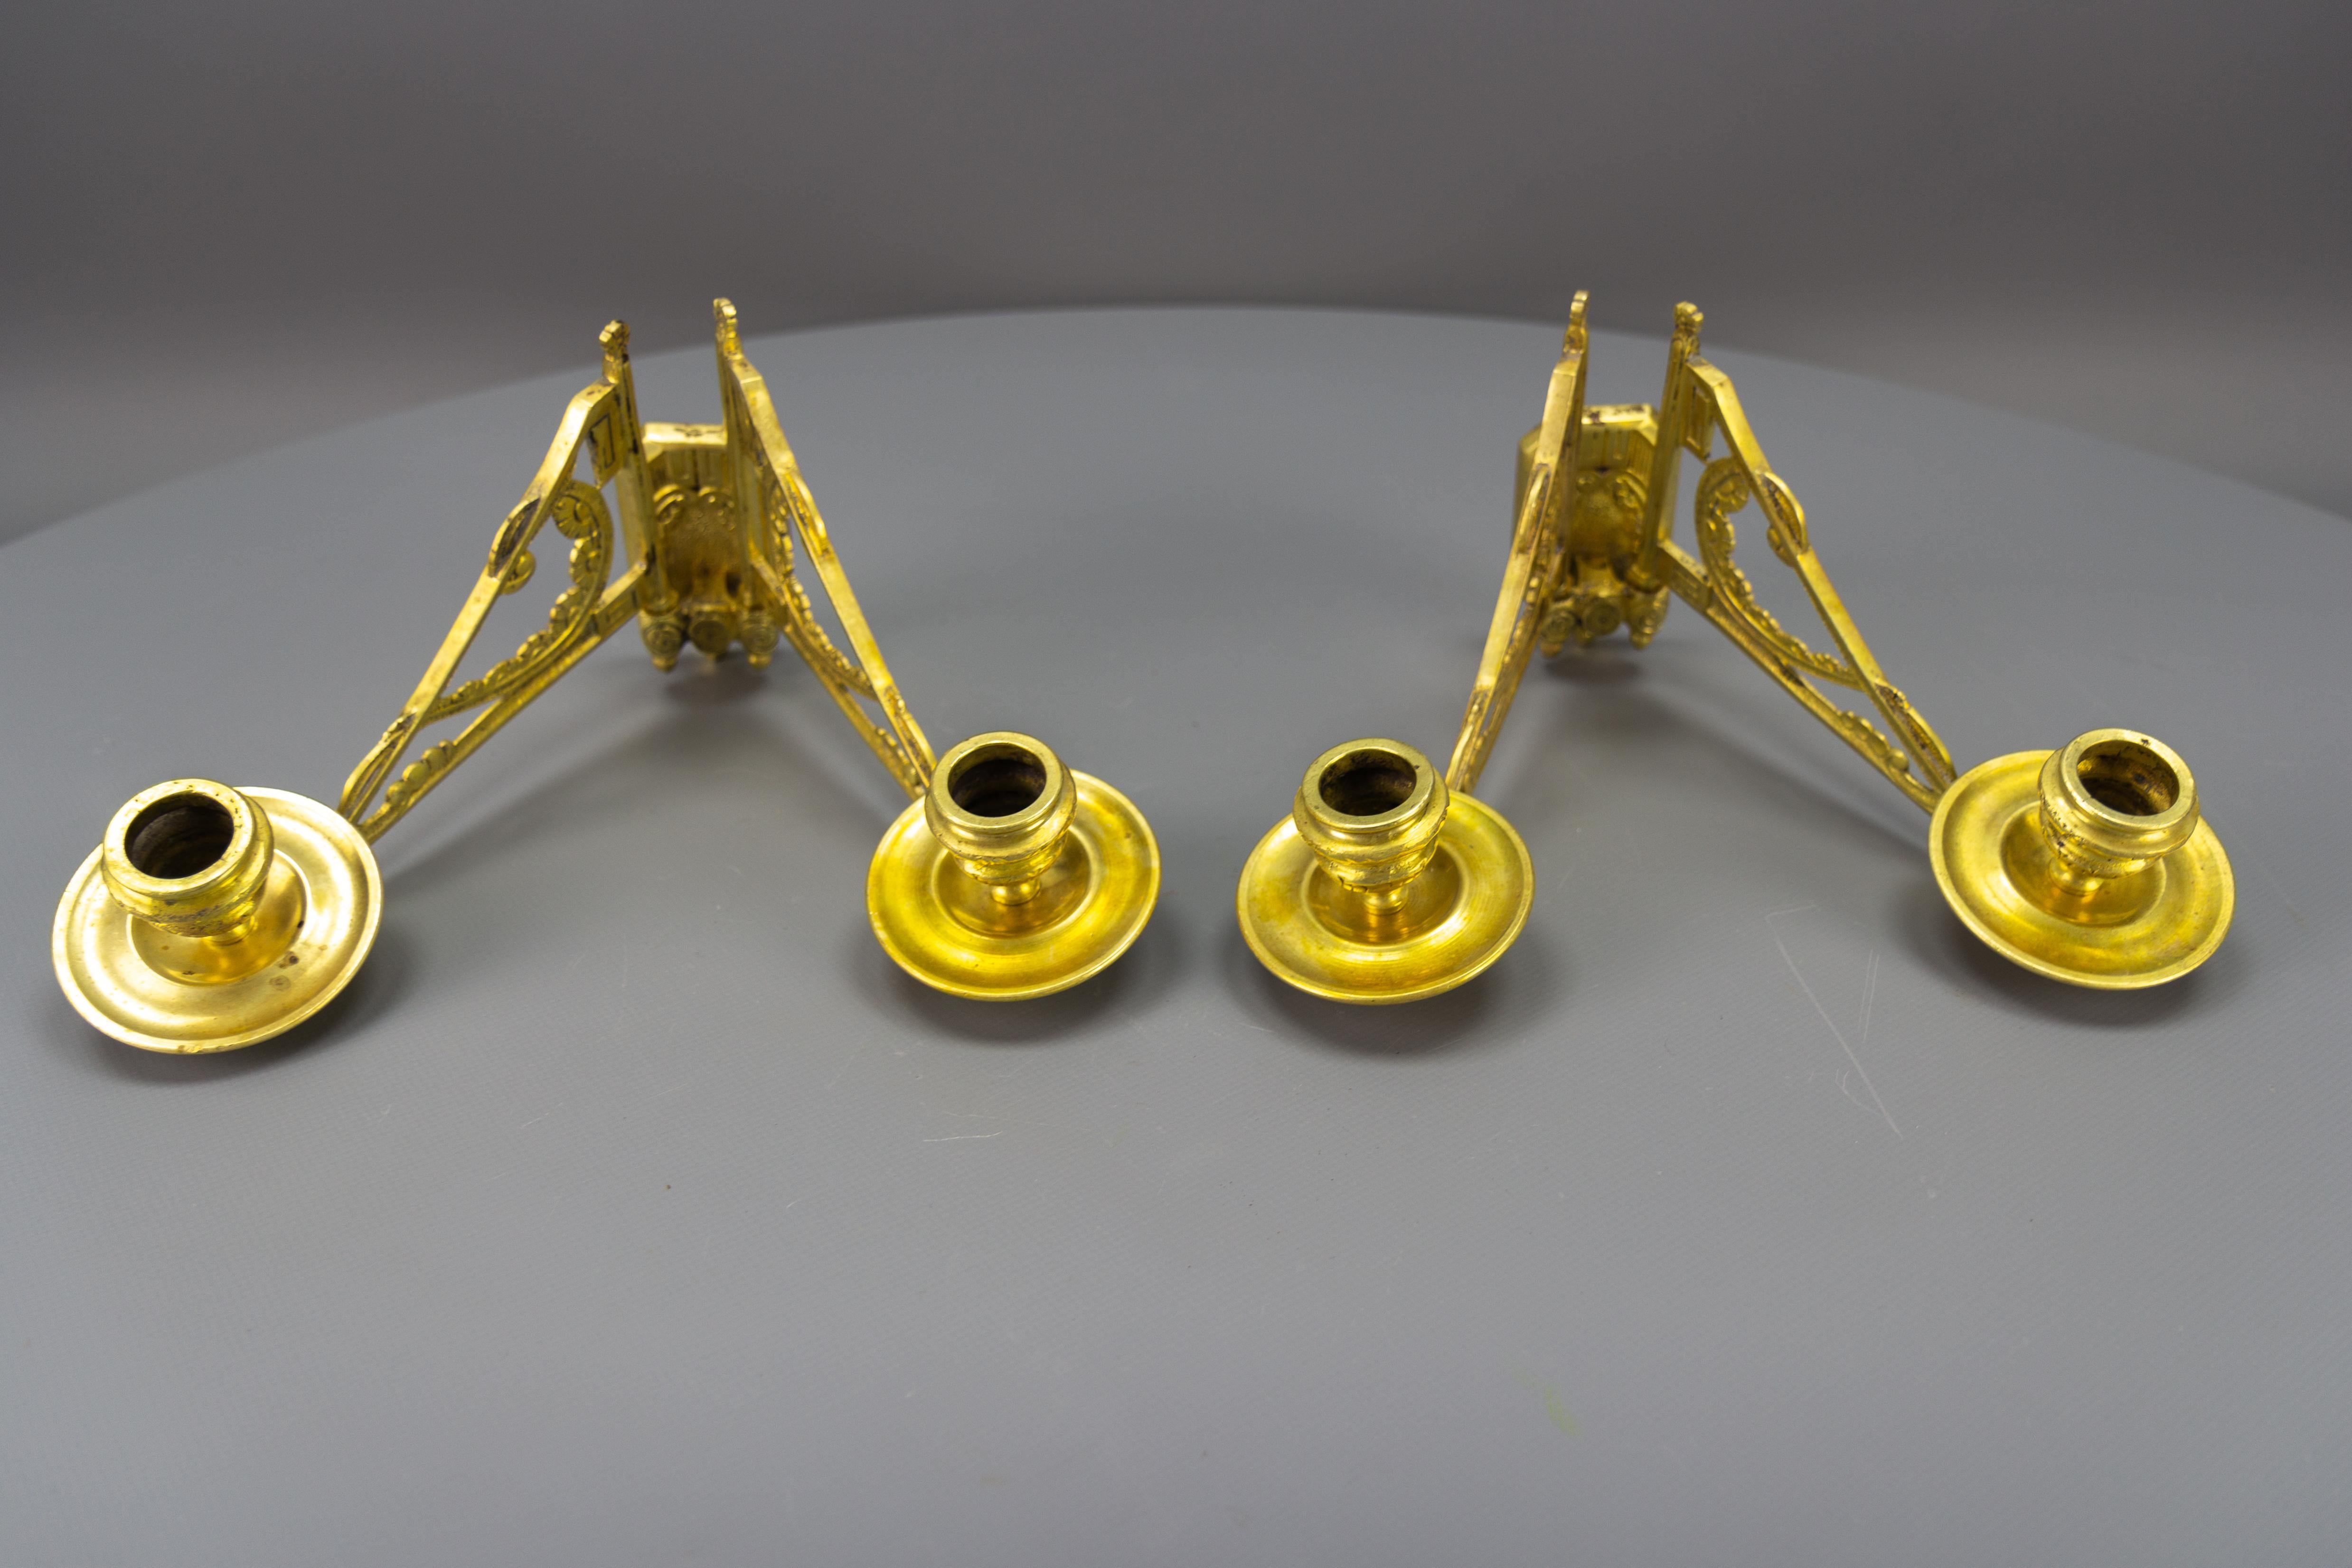 Pair of French Art Deco Brass Twin Arm Piano Candlestick Wall Lights by L. Pinet For Sale 1